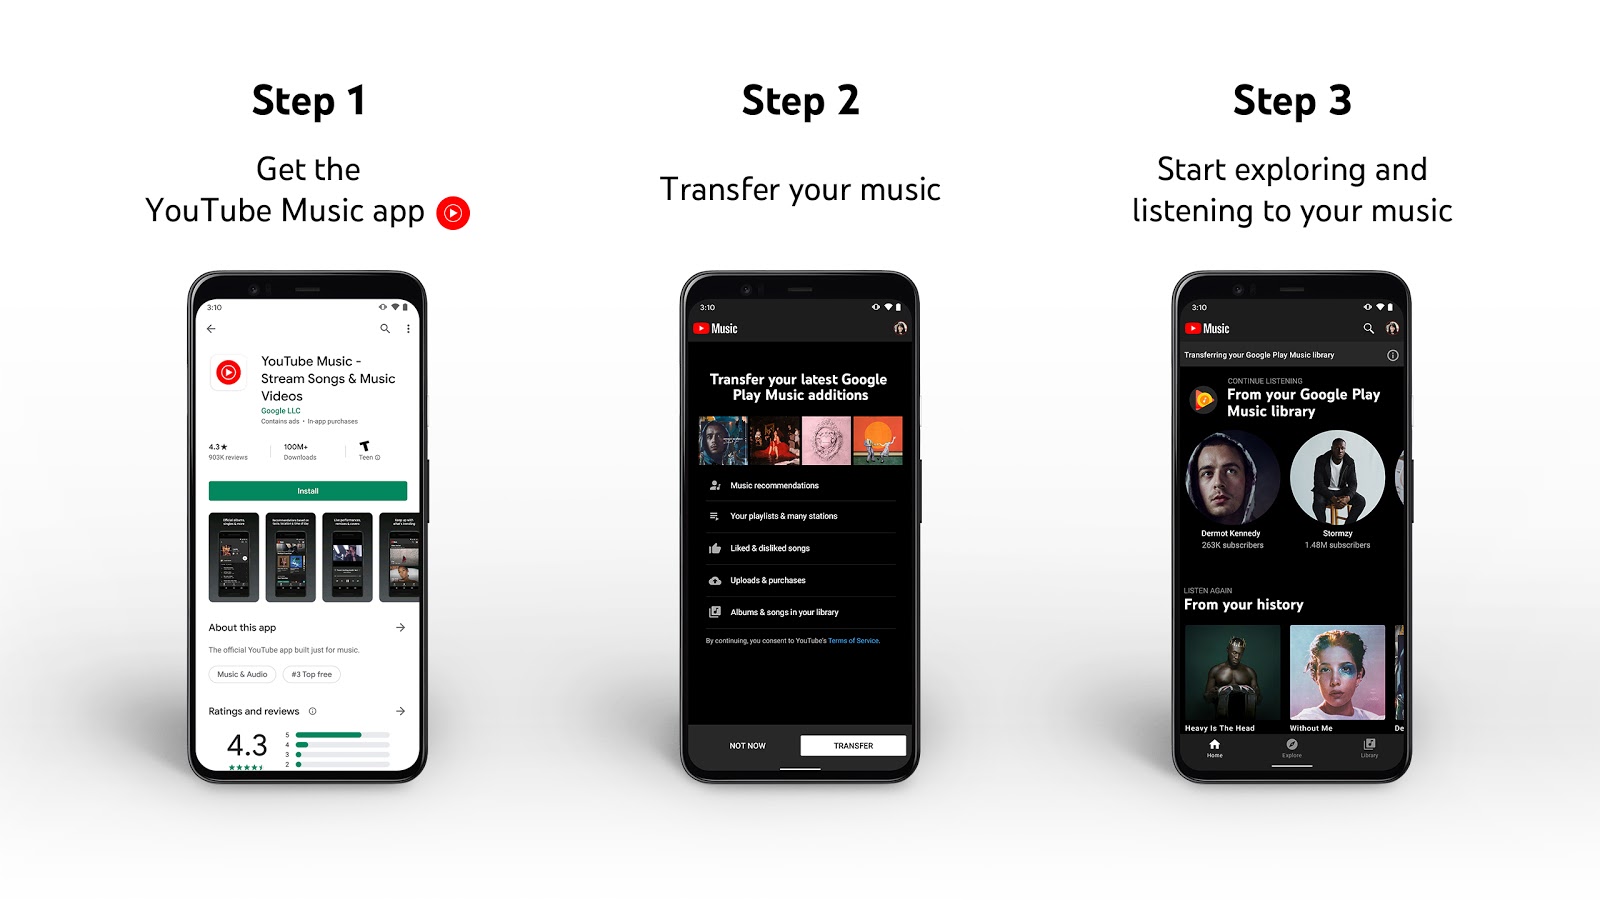 You can now transfer your Google Play Music library to YouTube Music GPM_PhoneComposite_StepByStep_2560x1440_alt.jpg